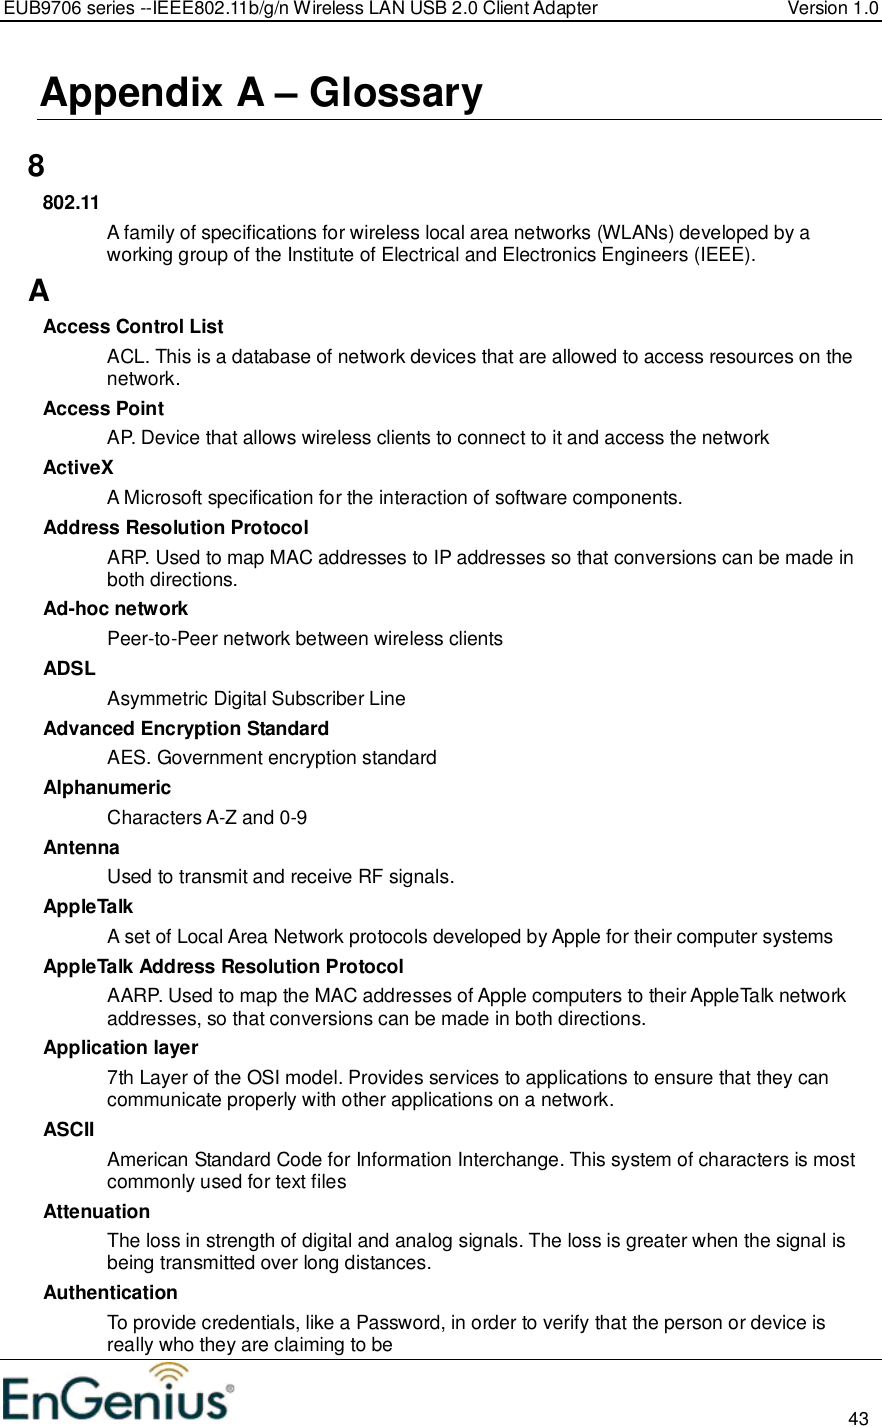 EUB9706 series --IEEE802.11b/g/n Wireless LAN USB 2.0 Client Adapter  Version 1.0                                                                                                                          43  Appendix A – Glossary   8 802.11 A family of specifications for wireless local area networks (WLANs) developed by a working group of the Institute of Electrical and Electronics Engineers (IEEE).  A Access Control List ACL. This is a database of network devices that are allowed to access resources on the network. Access Point AP. Device that allows wireless clients to connect to it and access the network ActiveX A Microsoft specification for the interaction of software components.  Address Resolution Protocol ARP. Used to map MAC addresses to IP addresses so that conversions can be made in both directions. Ad-hoc network Peer-to-Peer network between wireless clients ADSL Asymmetric Digital Subscriber Line Advanced Encryption Standard AES. Government encryption standard Alphanumeric Characters A-Z and 0-9 Antenna Used to transmit and receive RF signals. AppleTalk A set of Local Area Network protocols developed by Apple for their computer systems AppleTalk Address Resolution Protocol AARP. Used to map the MAC addresses of Apple computers to their AppleTalk network addresses, so that conversions can be made in both directions. Application layer 7th Layer of the OSI model. Provides services to applications to ensure that they can communicate properly with other applications on a network. ASCII American Standard Code for Information Interchange. This system of characters is most commonly used for text files Attenuation The loss in strength of digital and analog signals. The loss is greater when the signal is being transmitted over long distances. Authentication To provide credentials, like a Password, in order to verify that the person or device is really who they are claiming to be 